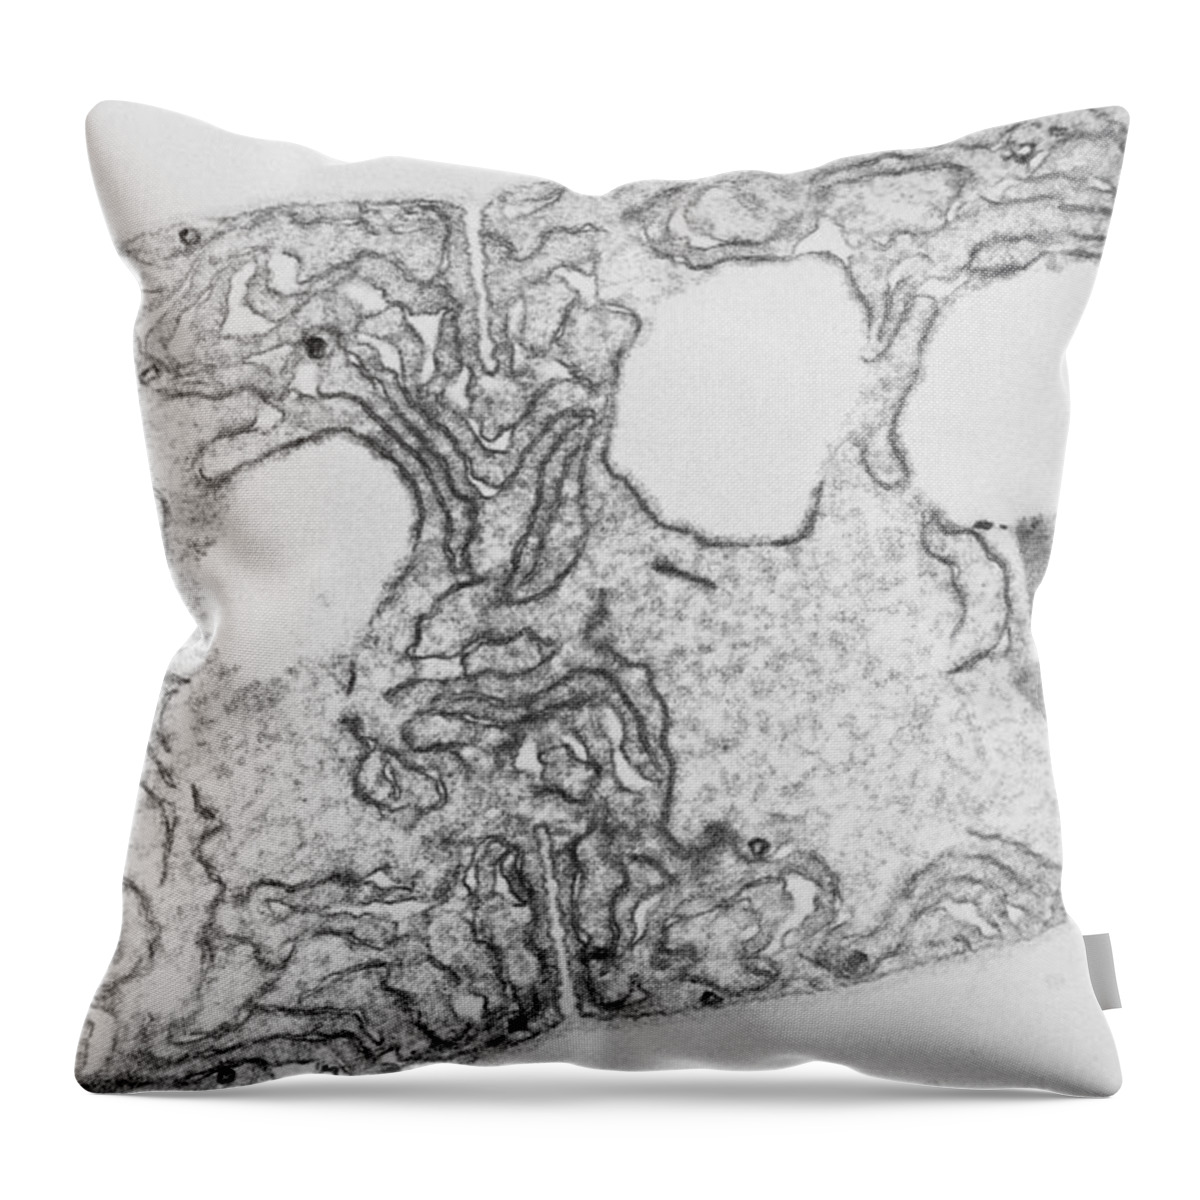 Filamentous Cyanobacteria Throw Pillow featuring the photograph Anabaena, Lm by Biology Media